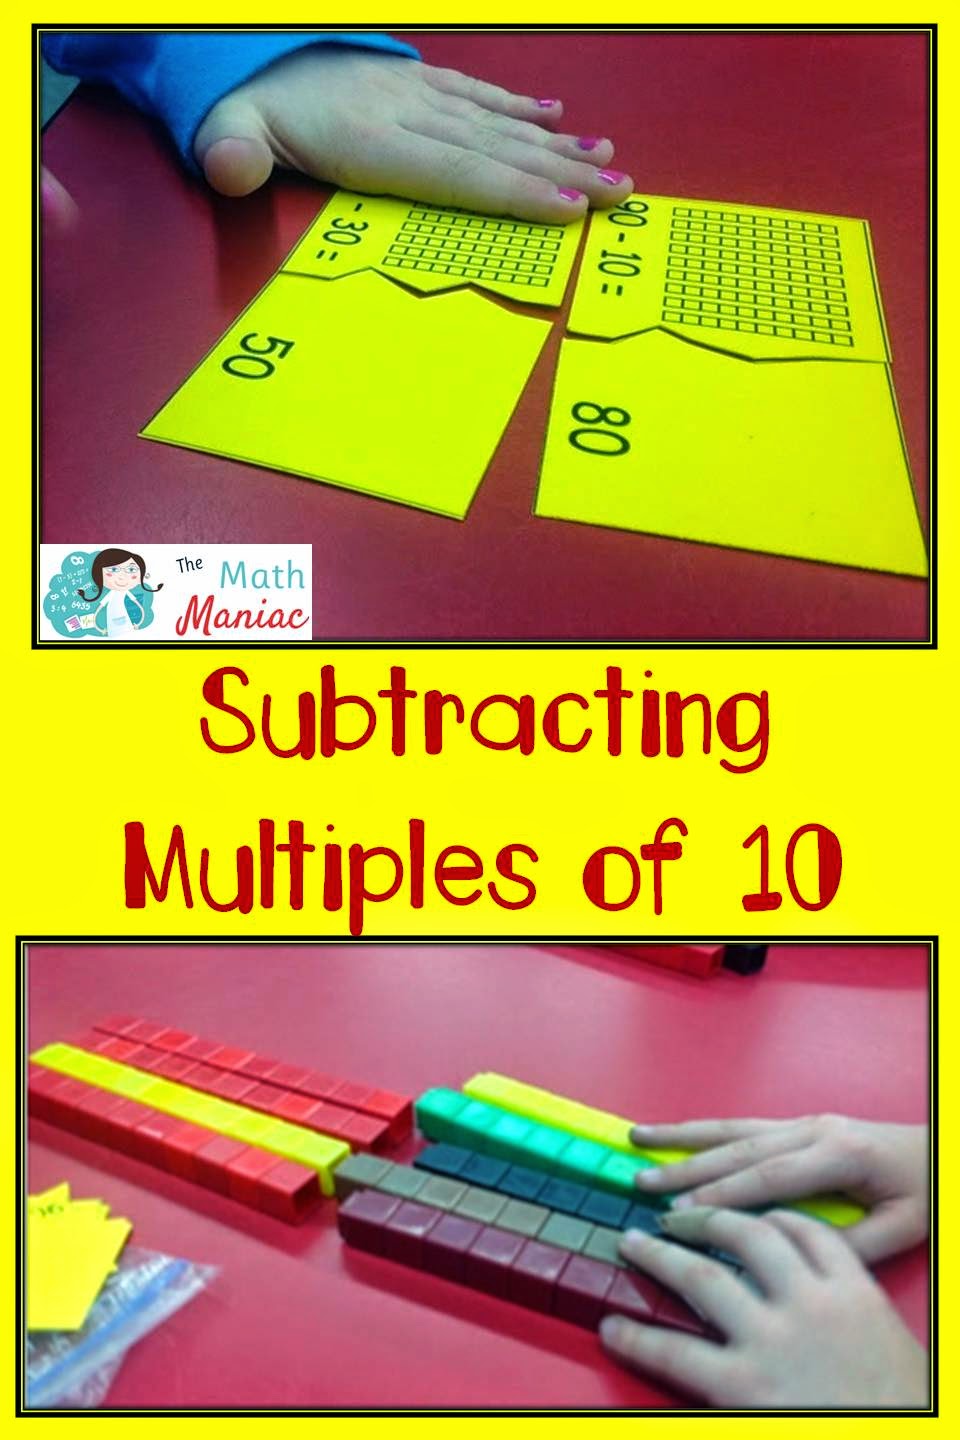 The Elementary Math Maniac Subtracting Multiples of 10 